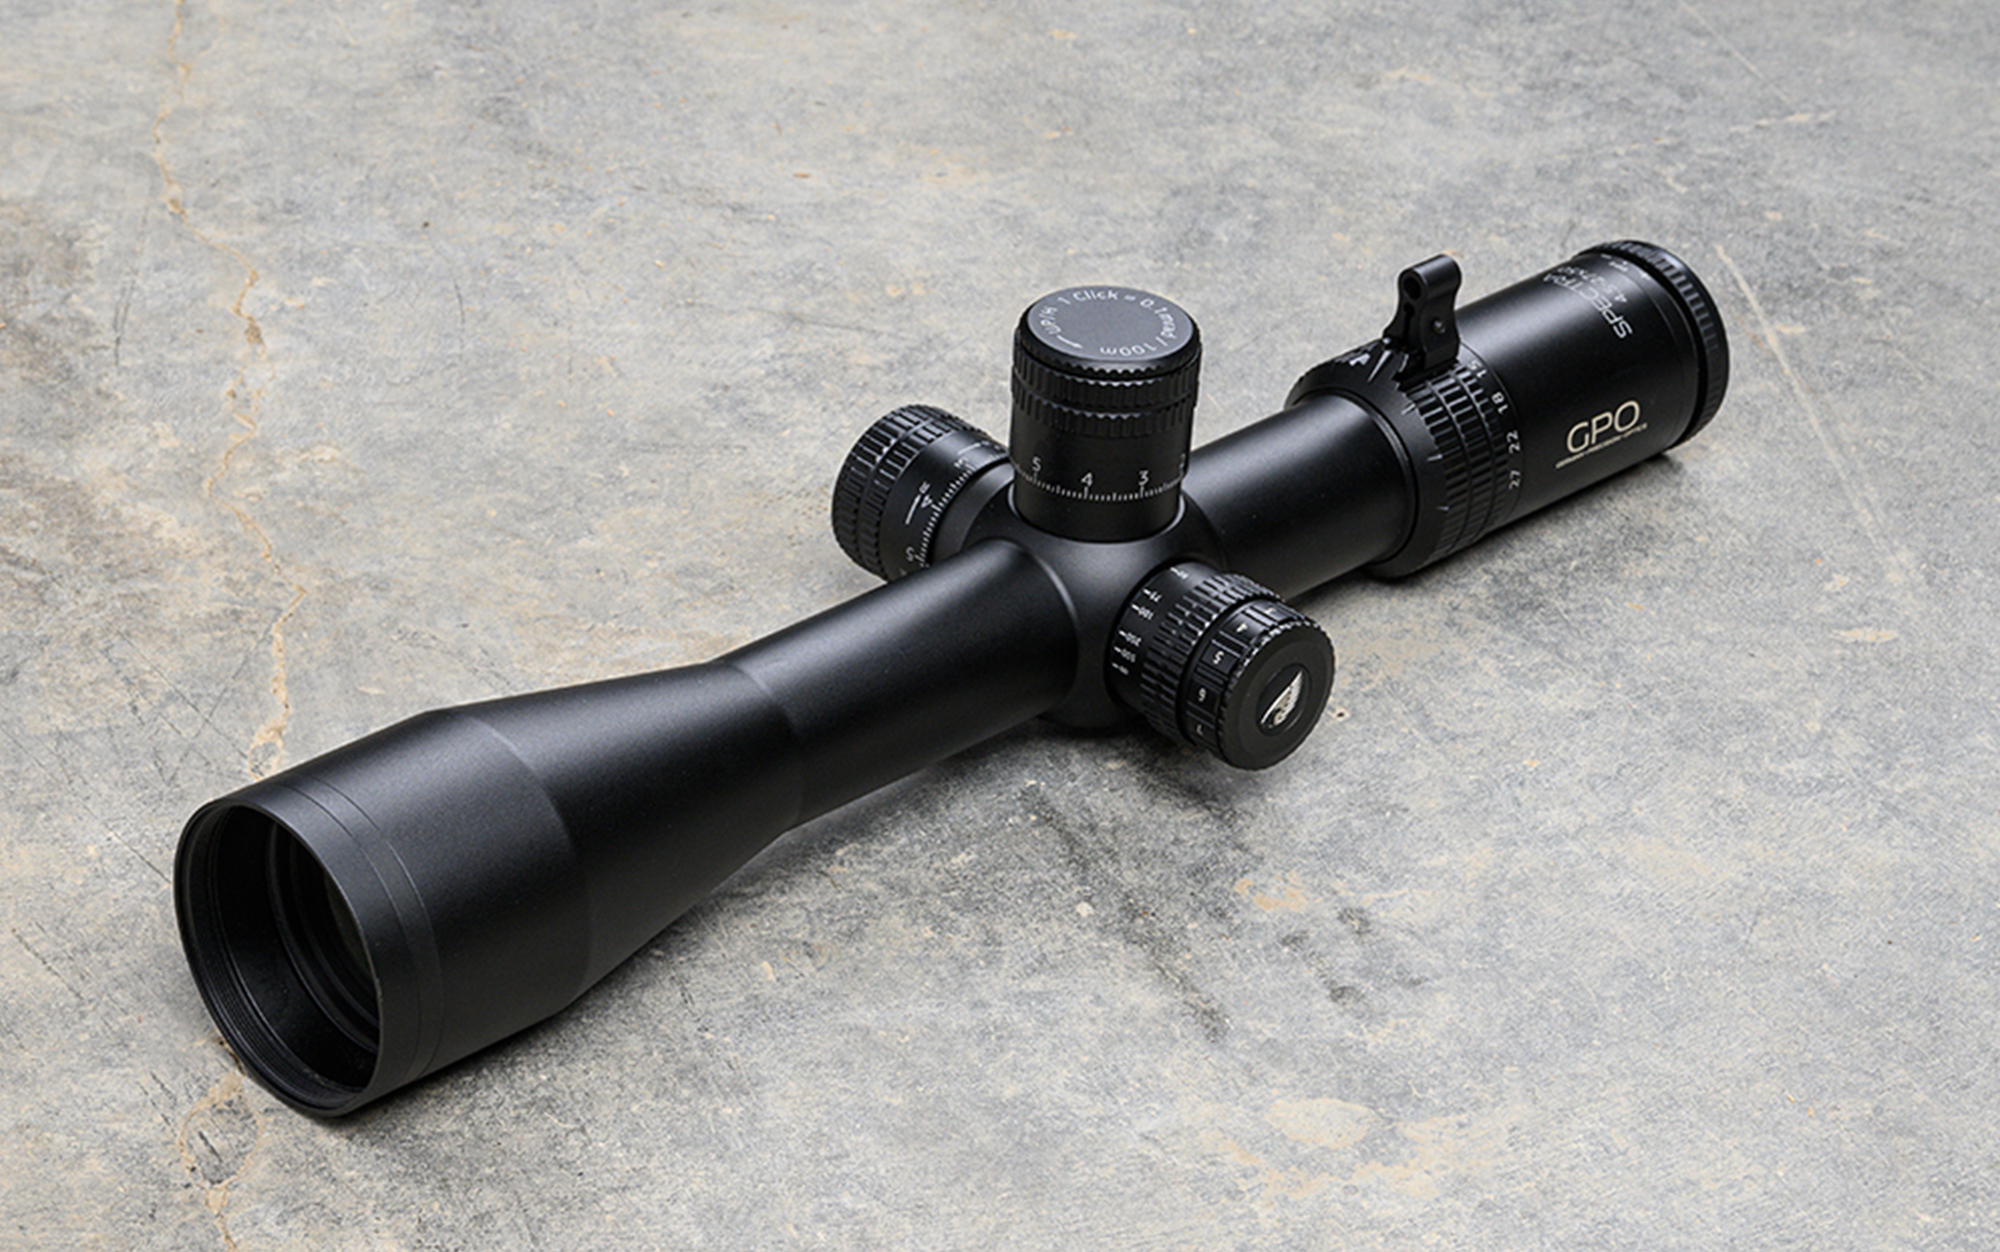 THe GPO Spectra 6x 4.5-27x50 is the best precision elk scope.